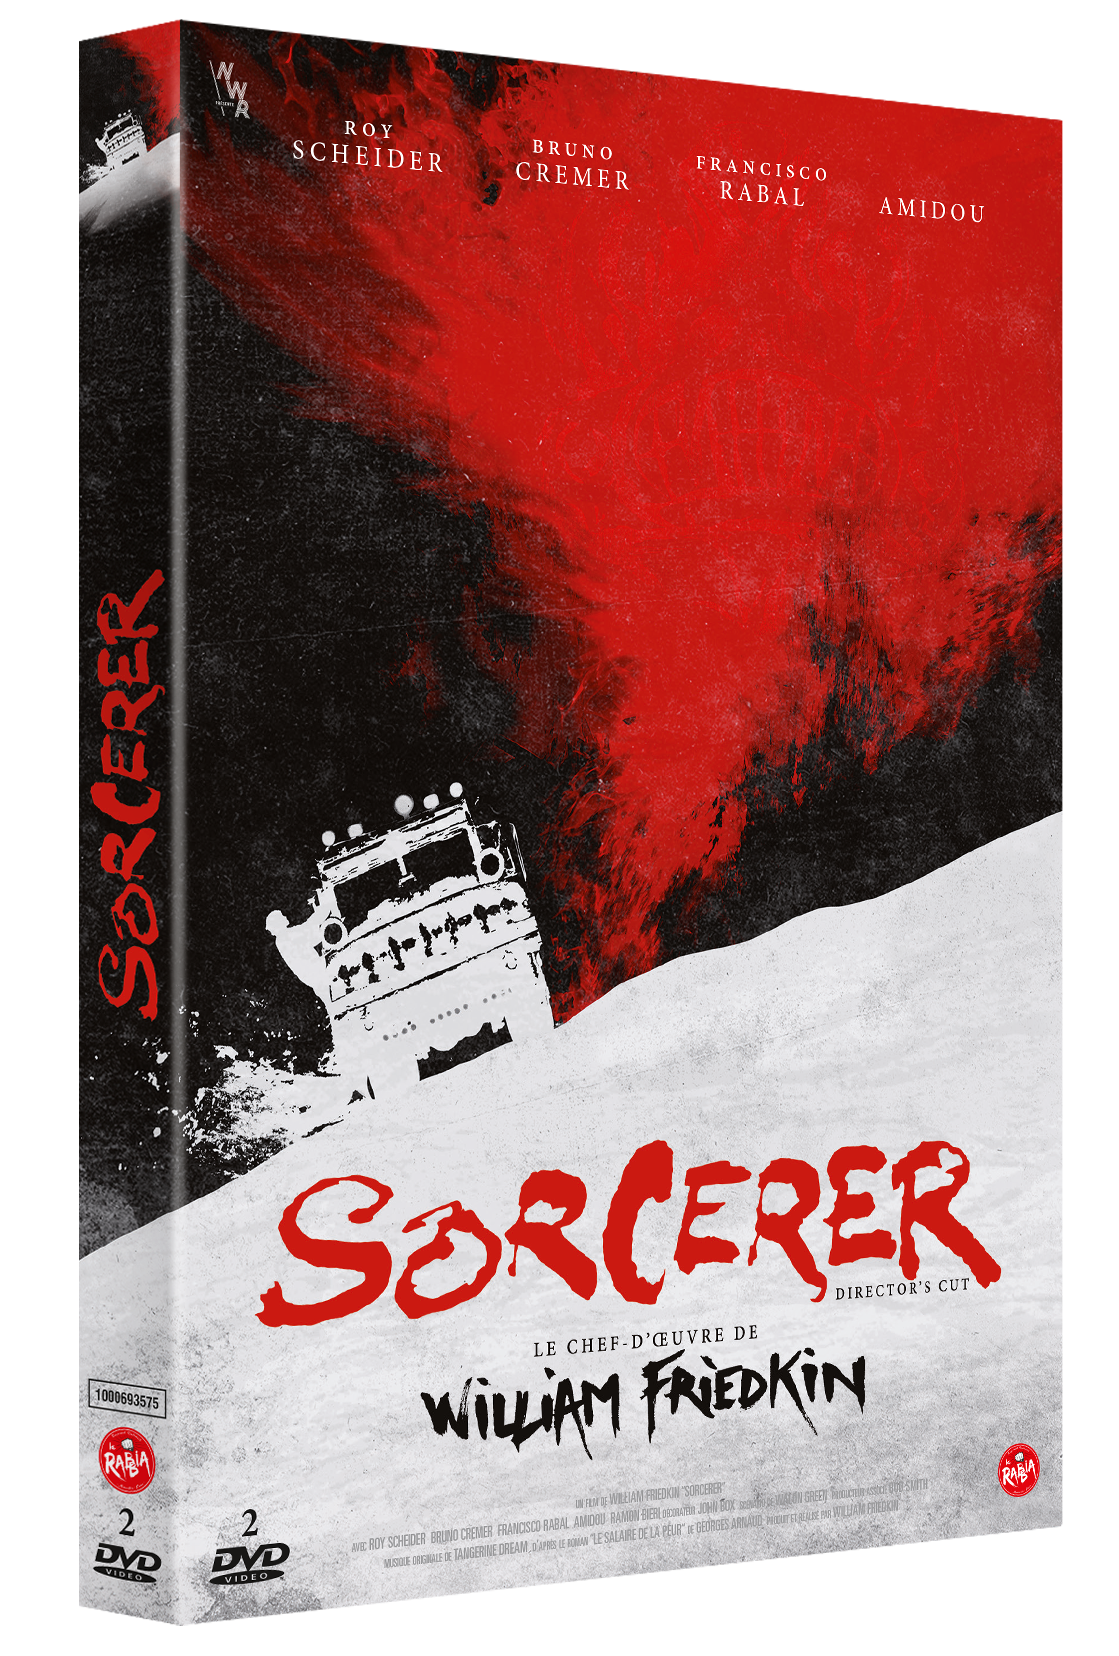 Edition Collector "Sorcerer" - 2 DVD